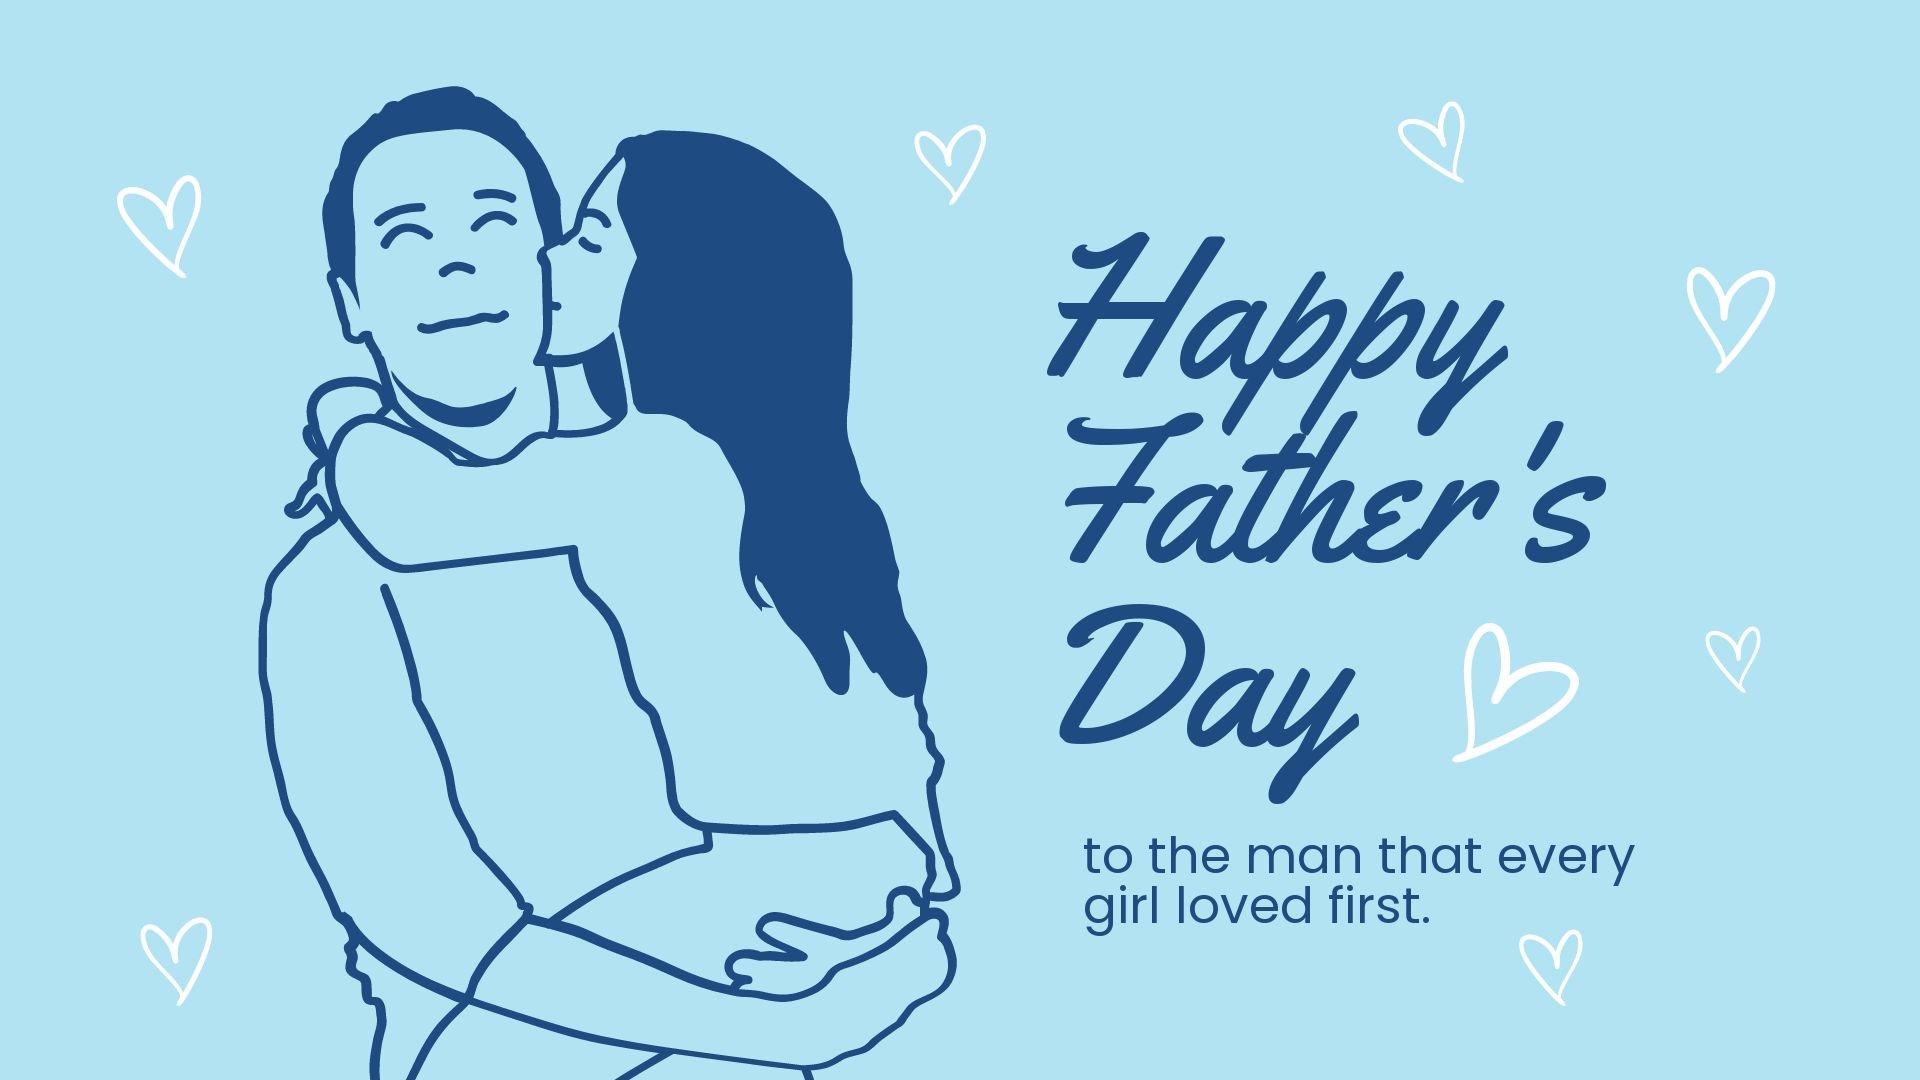 Free Happy Father's Day Wishes From Daughter Image